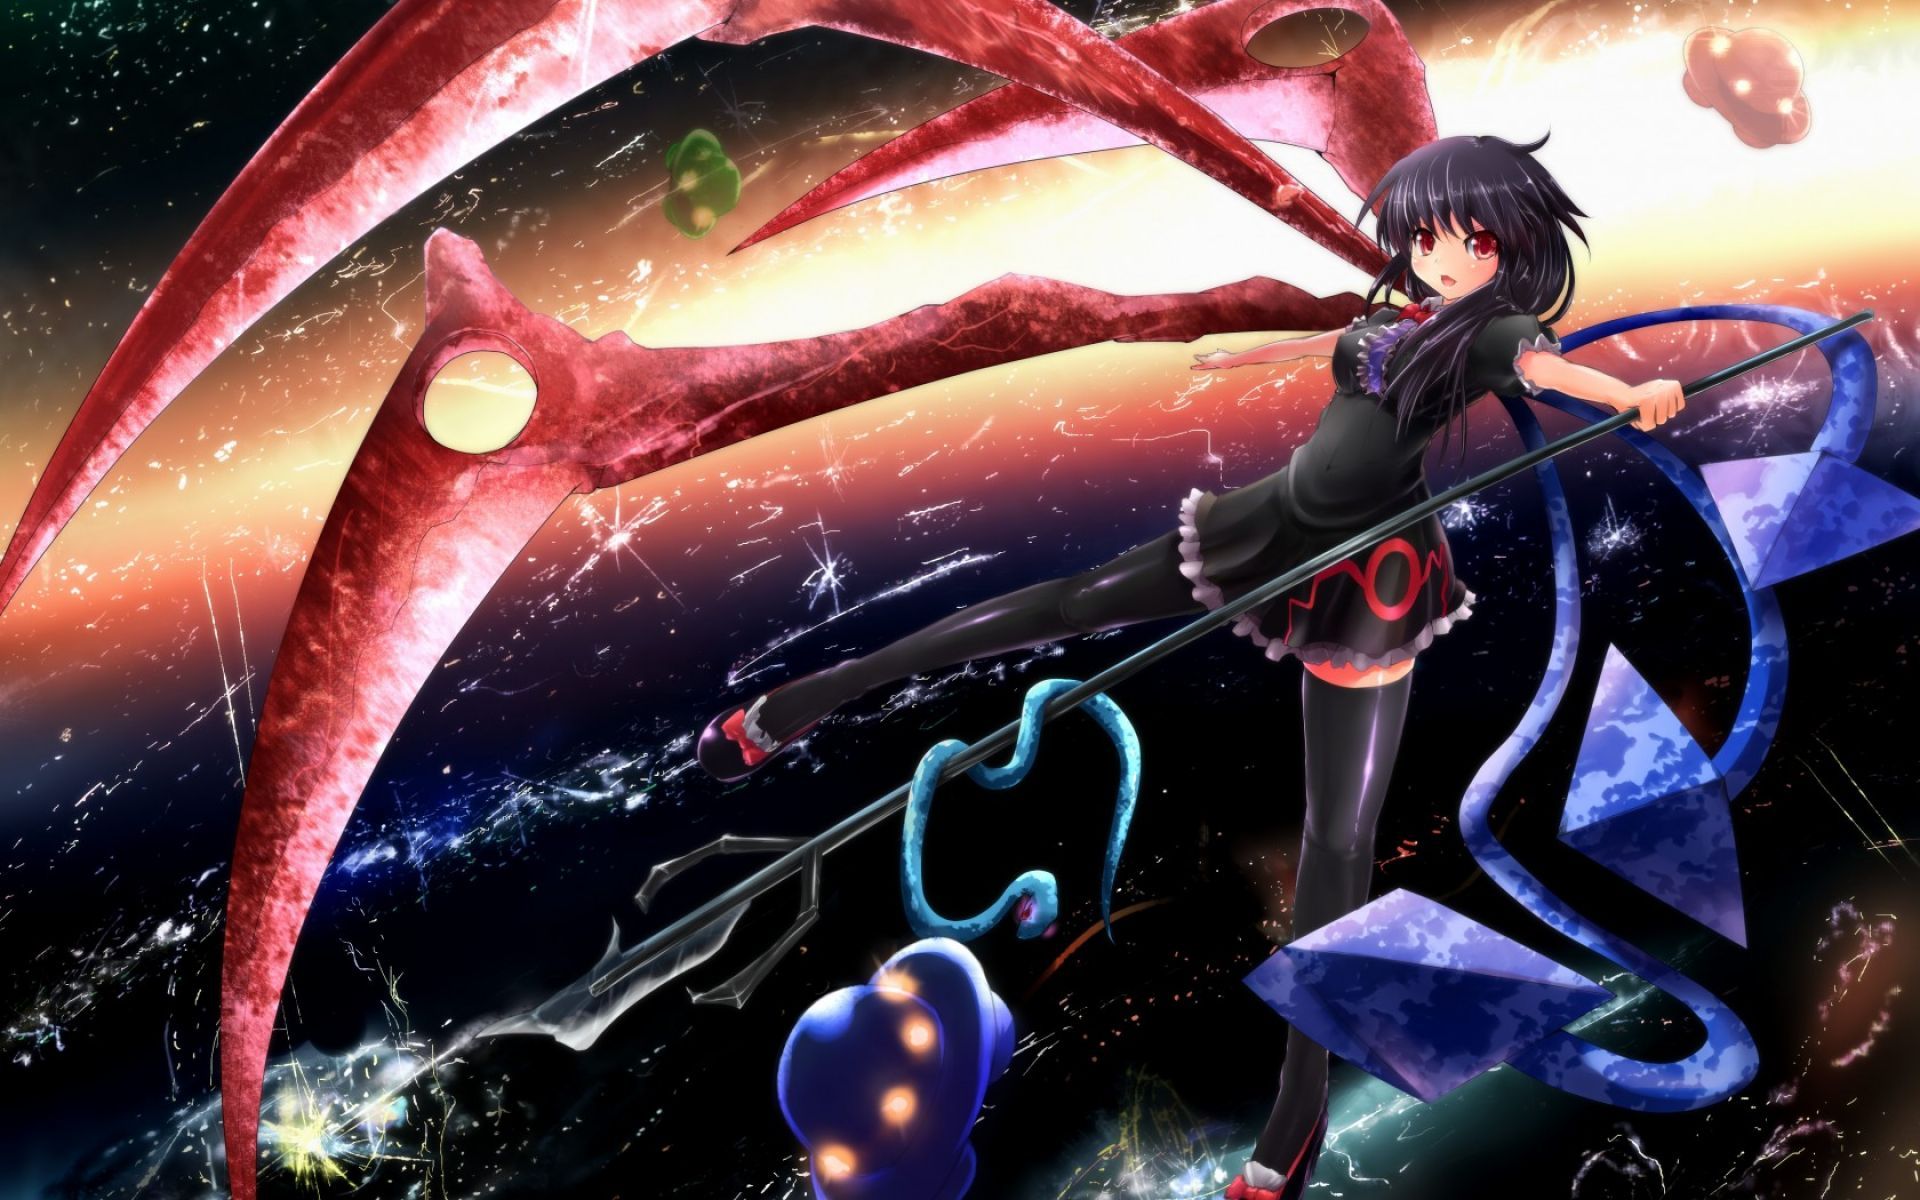 Girls Vs Boys - Fight - Anime - Background Wallpaper Download | MobCup